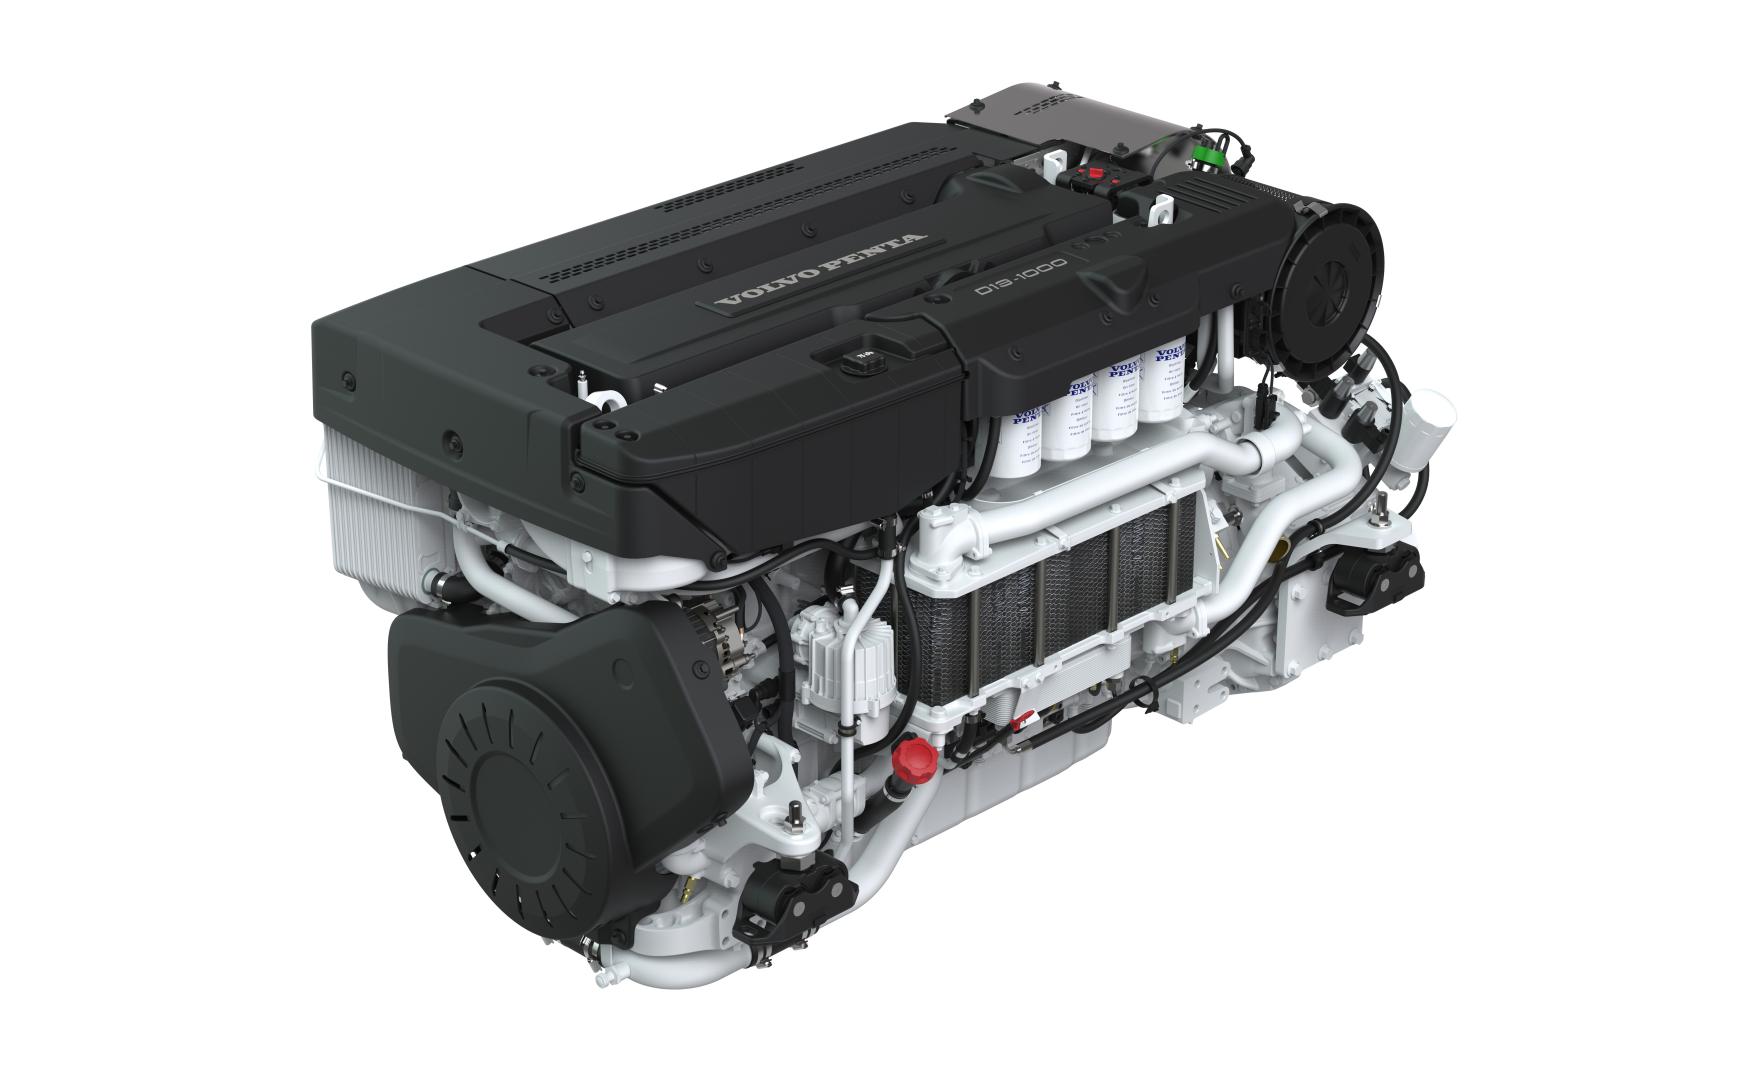 Volvo Penta’s D13-1000 is the company’s most powerful marine leisure engine